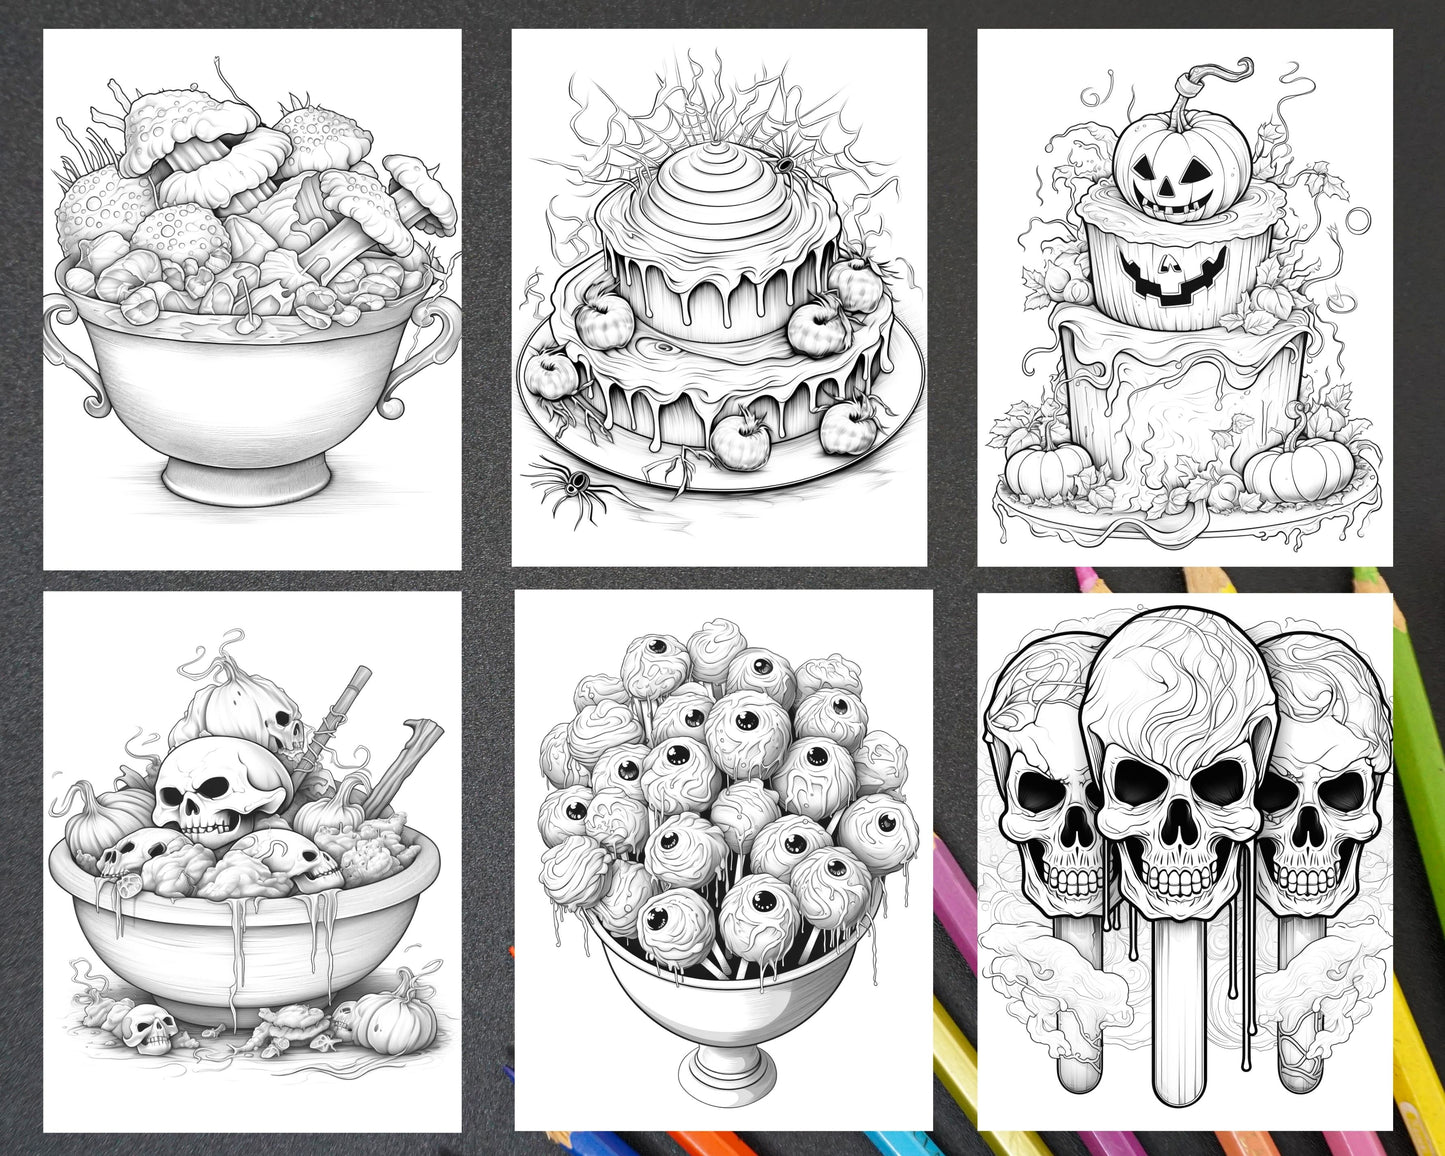 Halloween Spooky Desserts Grayscale Coloring Pages, Printable Adult Coloring Sheets, Ghostly Coloring Patterns, Relaxing Stress Relief Coloring Book, Spooky Desserts Creative Coloring